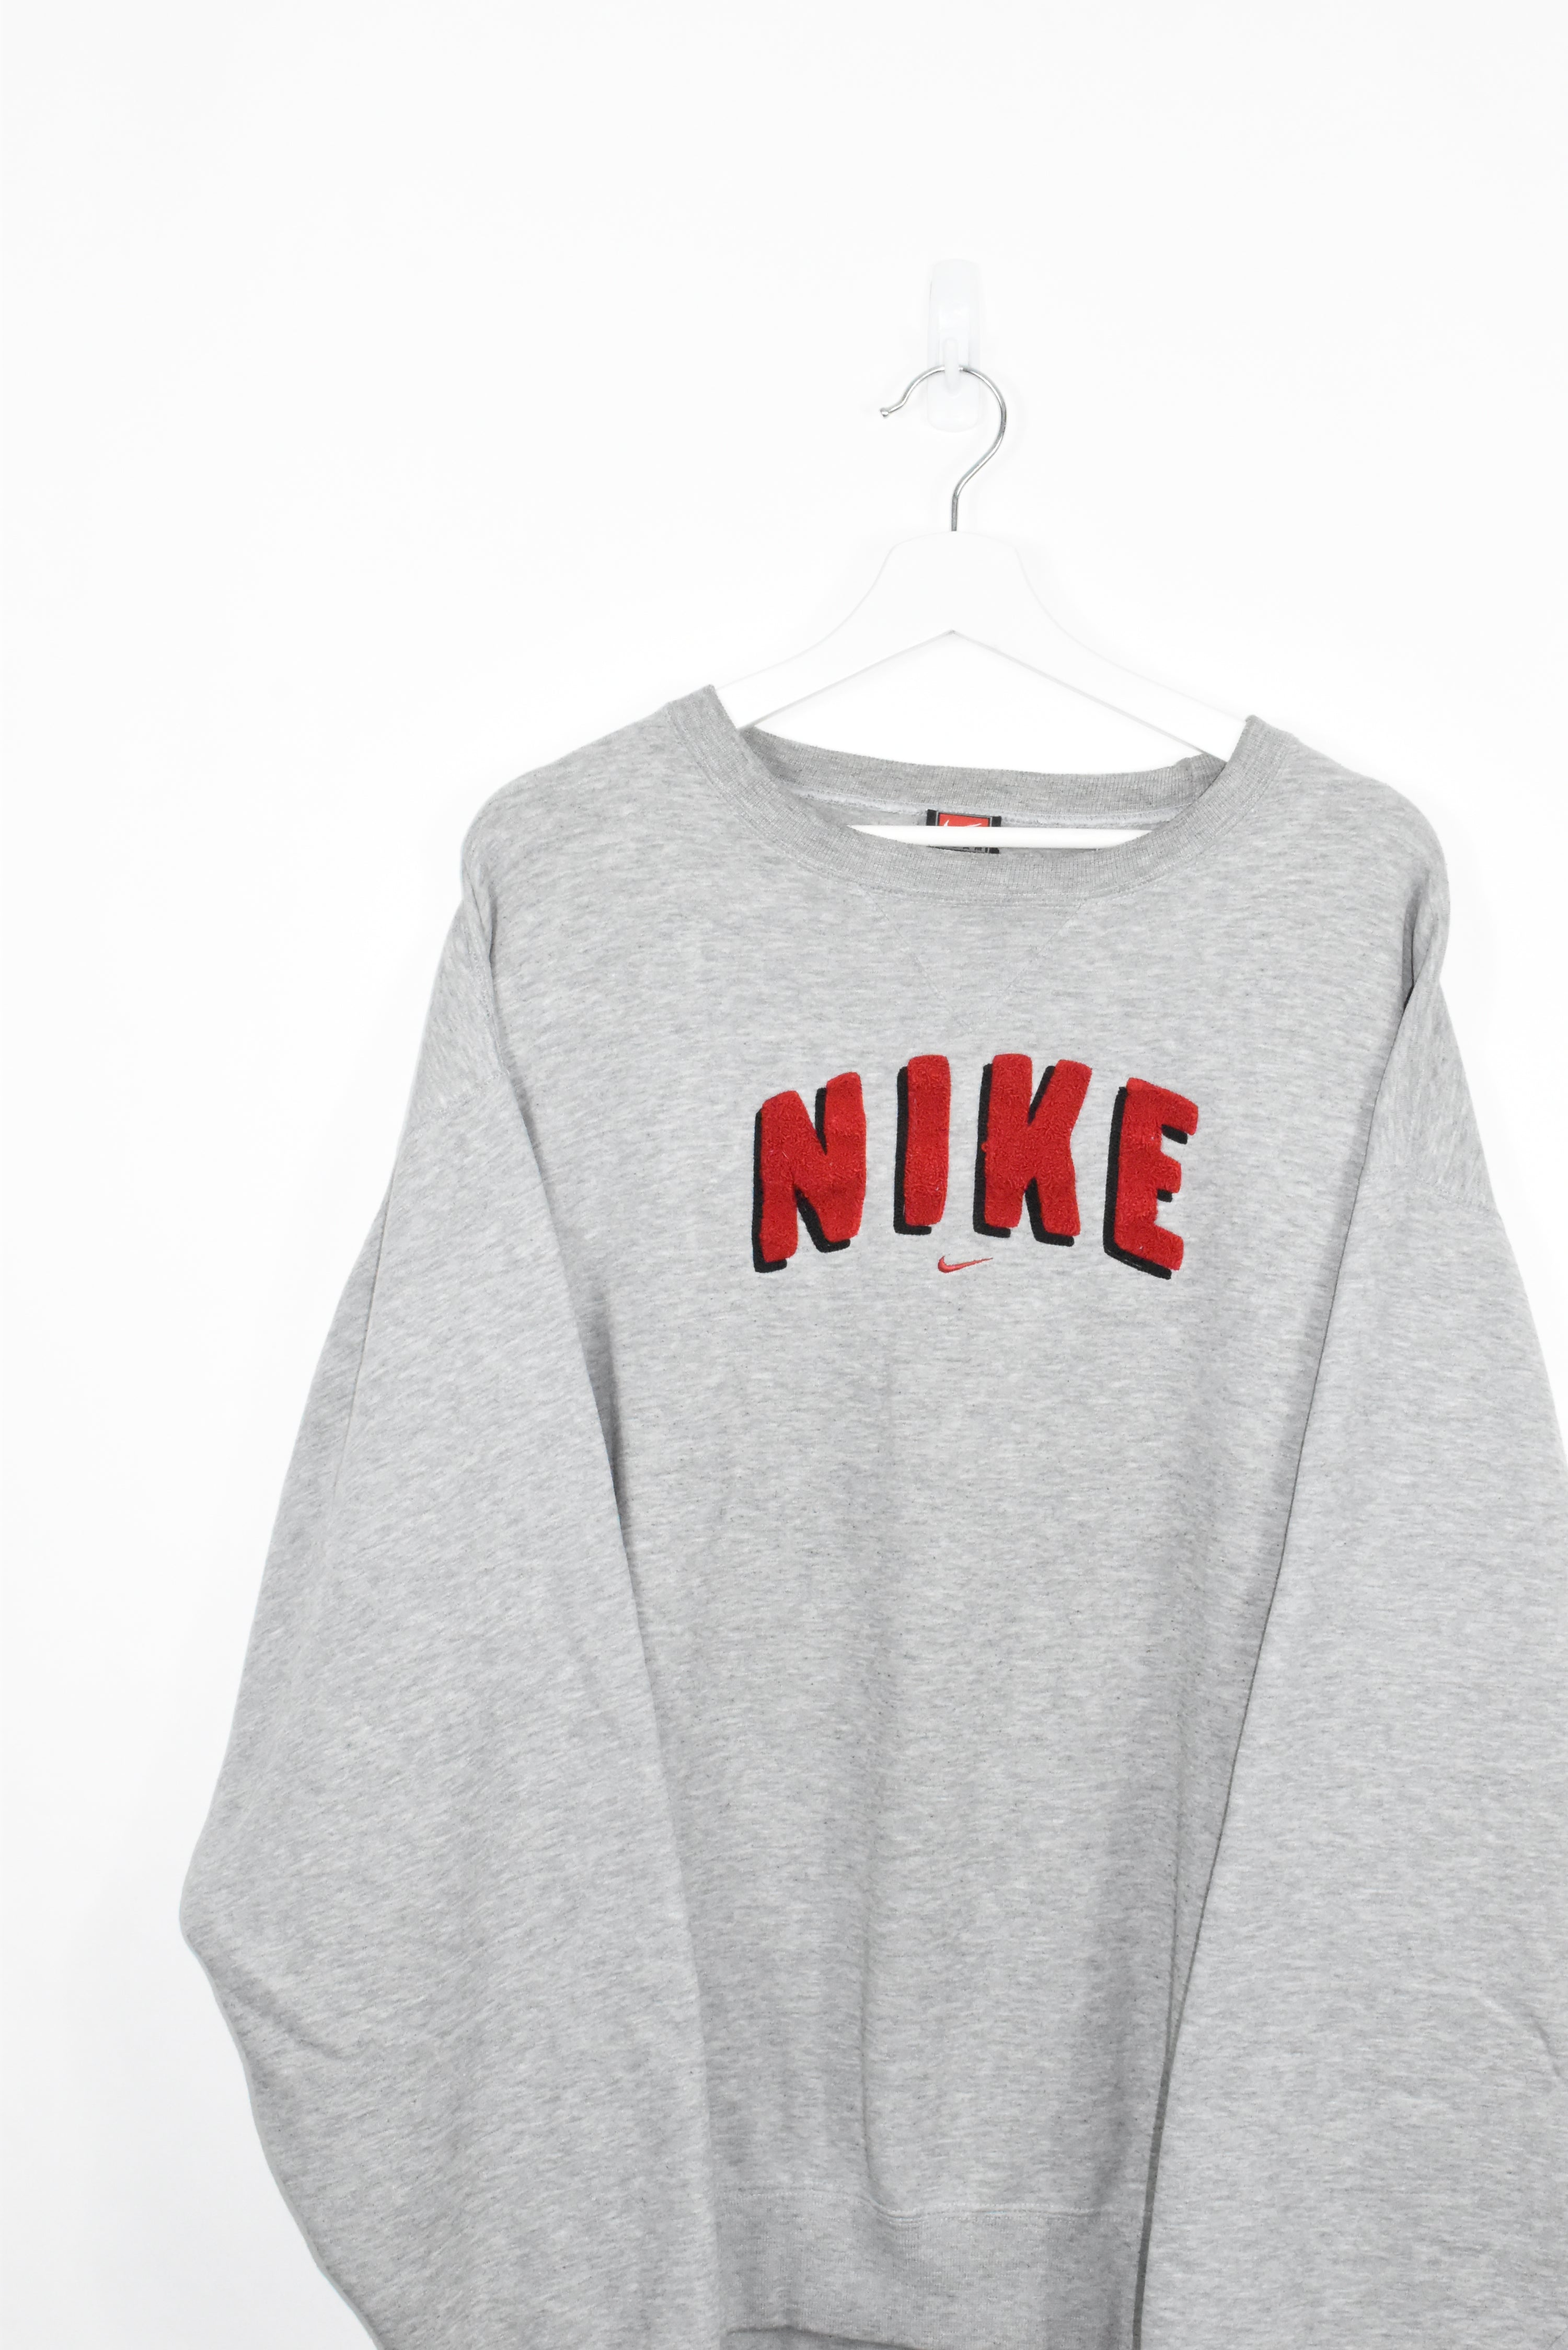 Vintage Nike Embroidered 3D Spellout Sweatshirt Xlarge